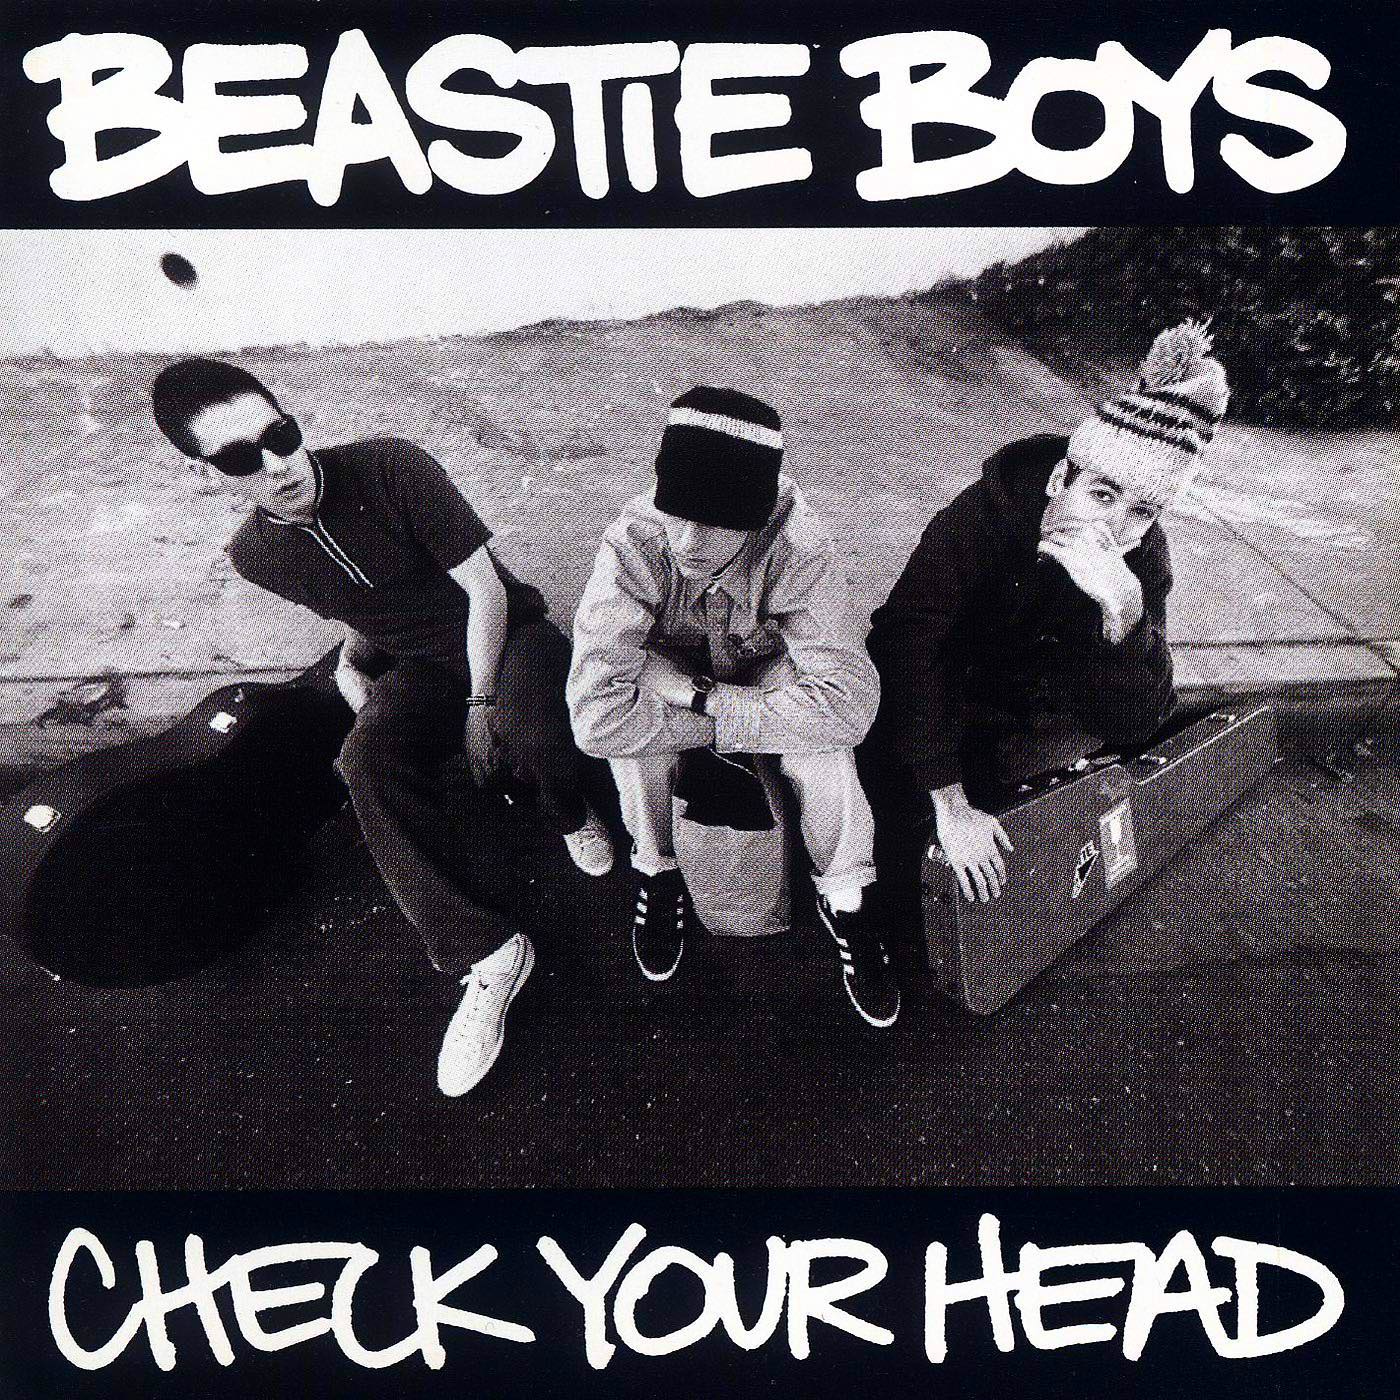 30 years ago today, Beastie Boys unleashed CHECK YOUR HEAD! #instantclassic

Released via Capitol Records and recorded at  G-Son Studios in Atwater Village in 1991, it served as the band's 3rd studio album. The album featured a unique blend of uncovential tracks ranging from “So What’cha Want,” "Pass The Mic," "Jimmy James," "Finger Lickin' Good" and more. 
Most importantly, 30 years after it's initial release, it still holds up!

#beastieboys #checkyourhead #hiphop #classicalbums #checkyourheadturns25 #music #adrock #MCA #MikeD #CapitolRecords #sowhatchawant #professorbooty #passthemic